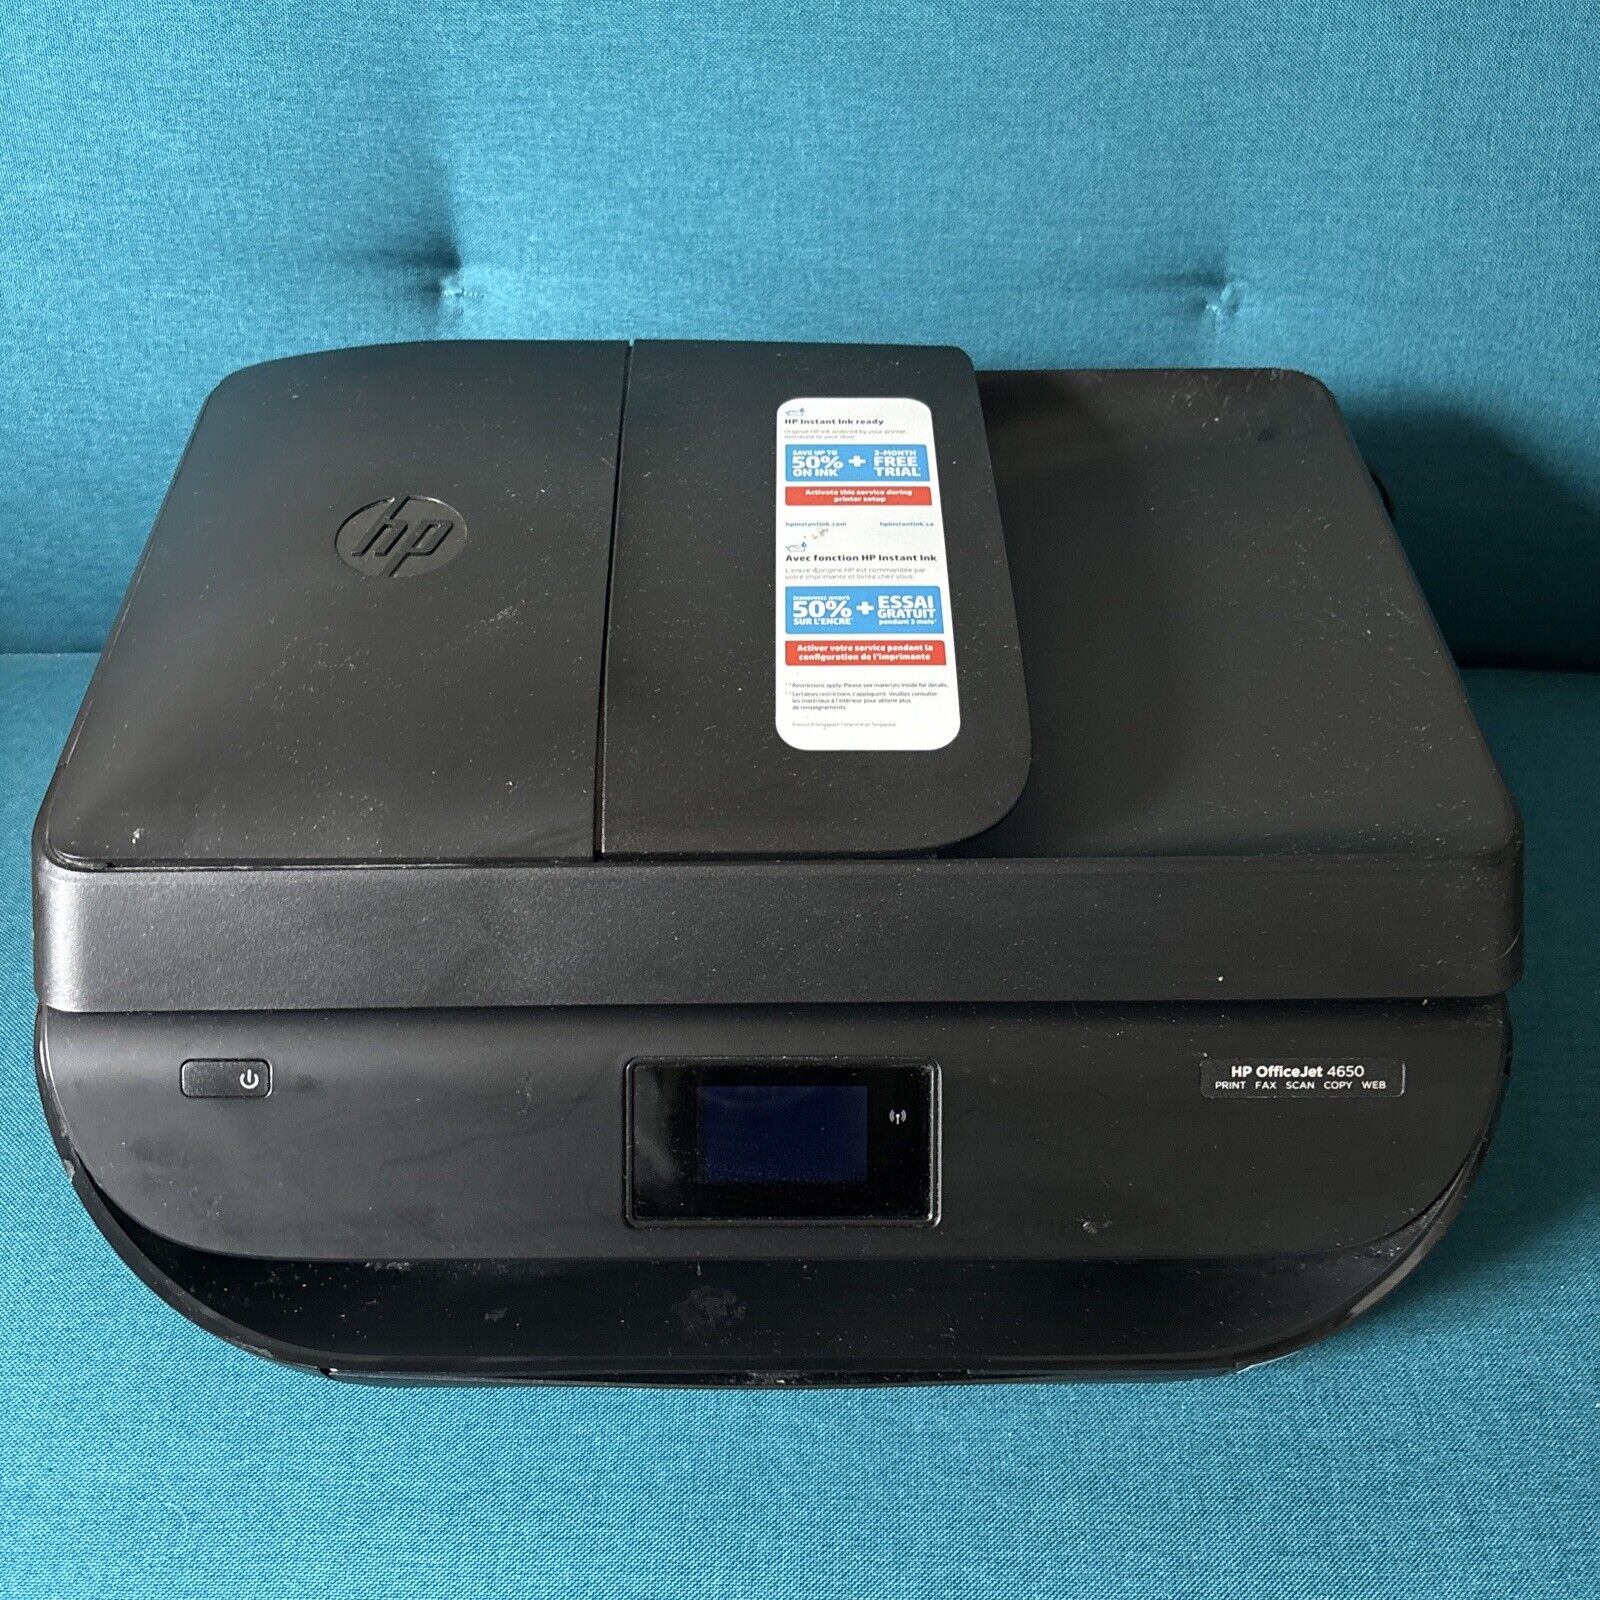 HP OfficeJet 4650 Bluetooth Wireless All-in-One Printer  - Tested